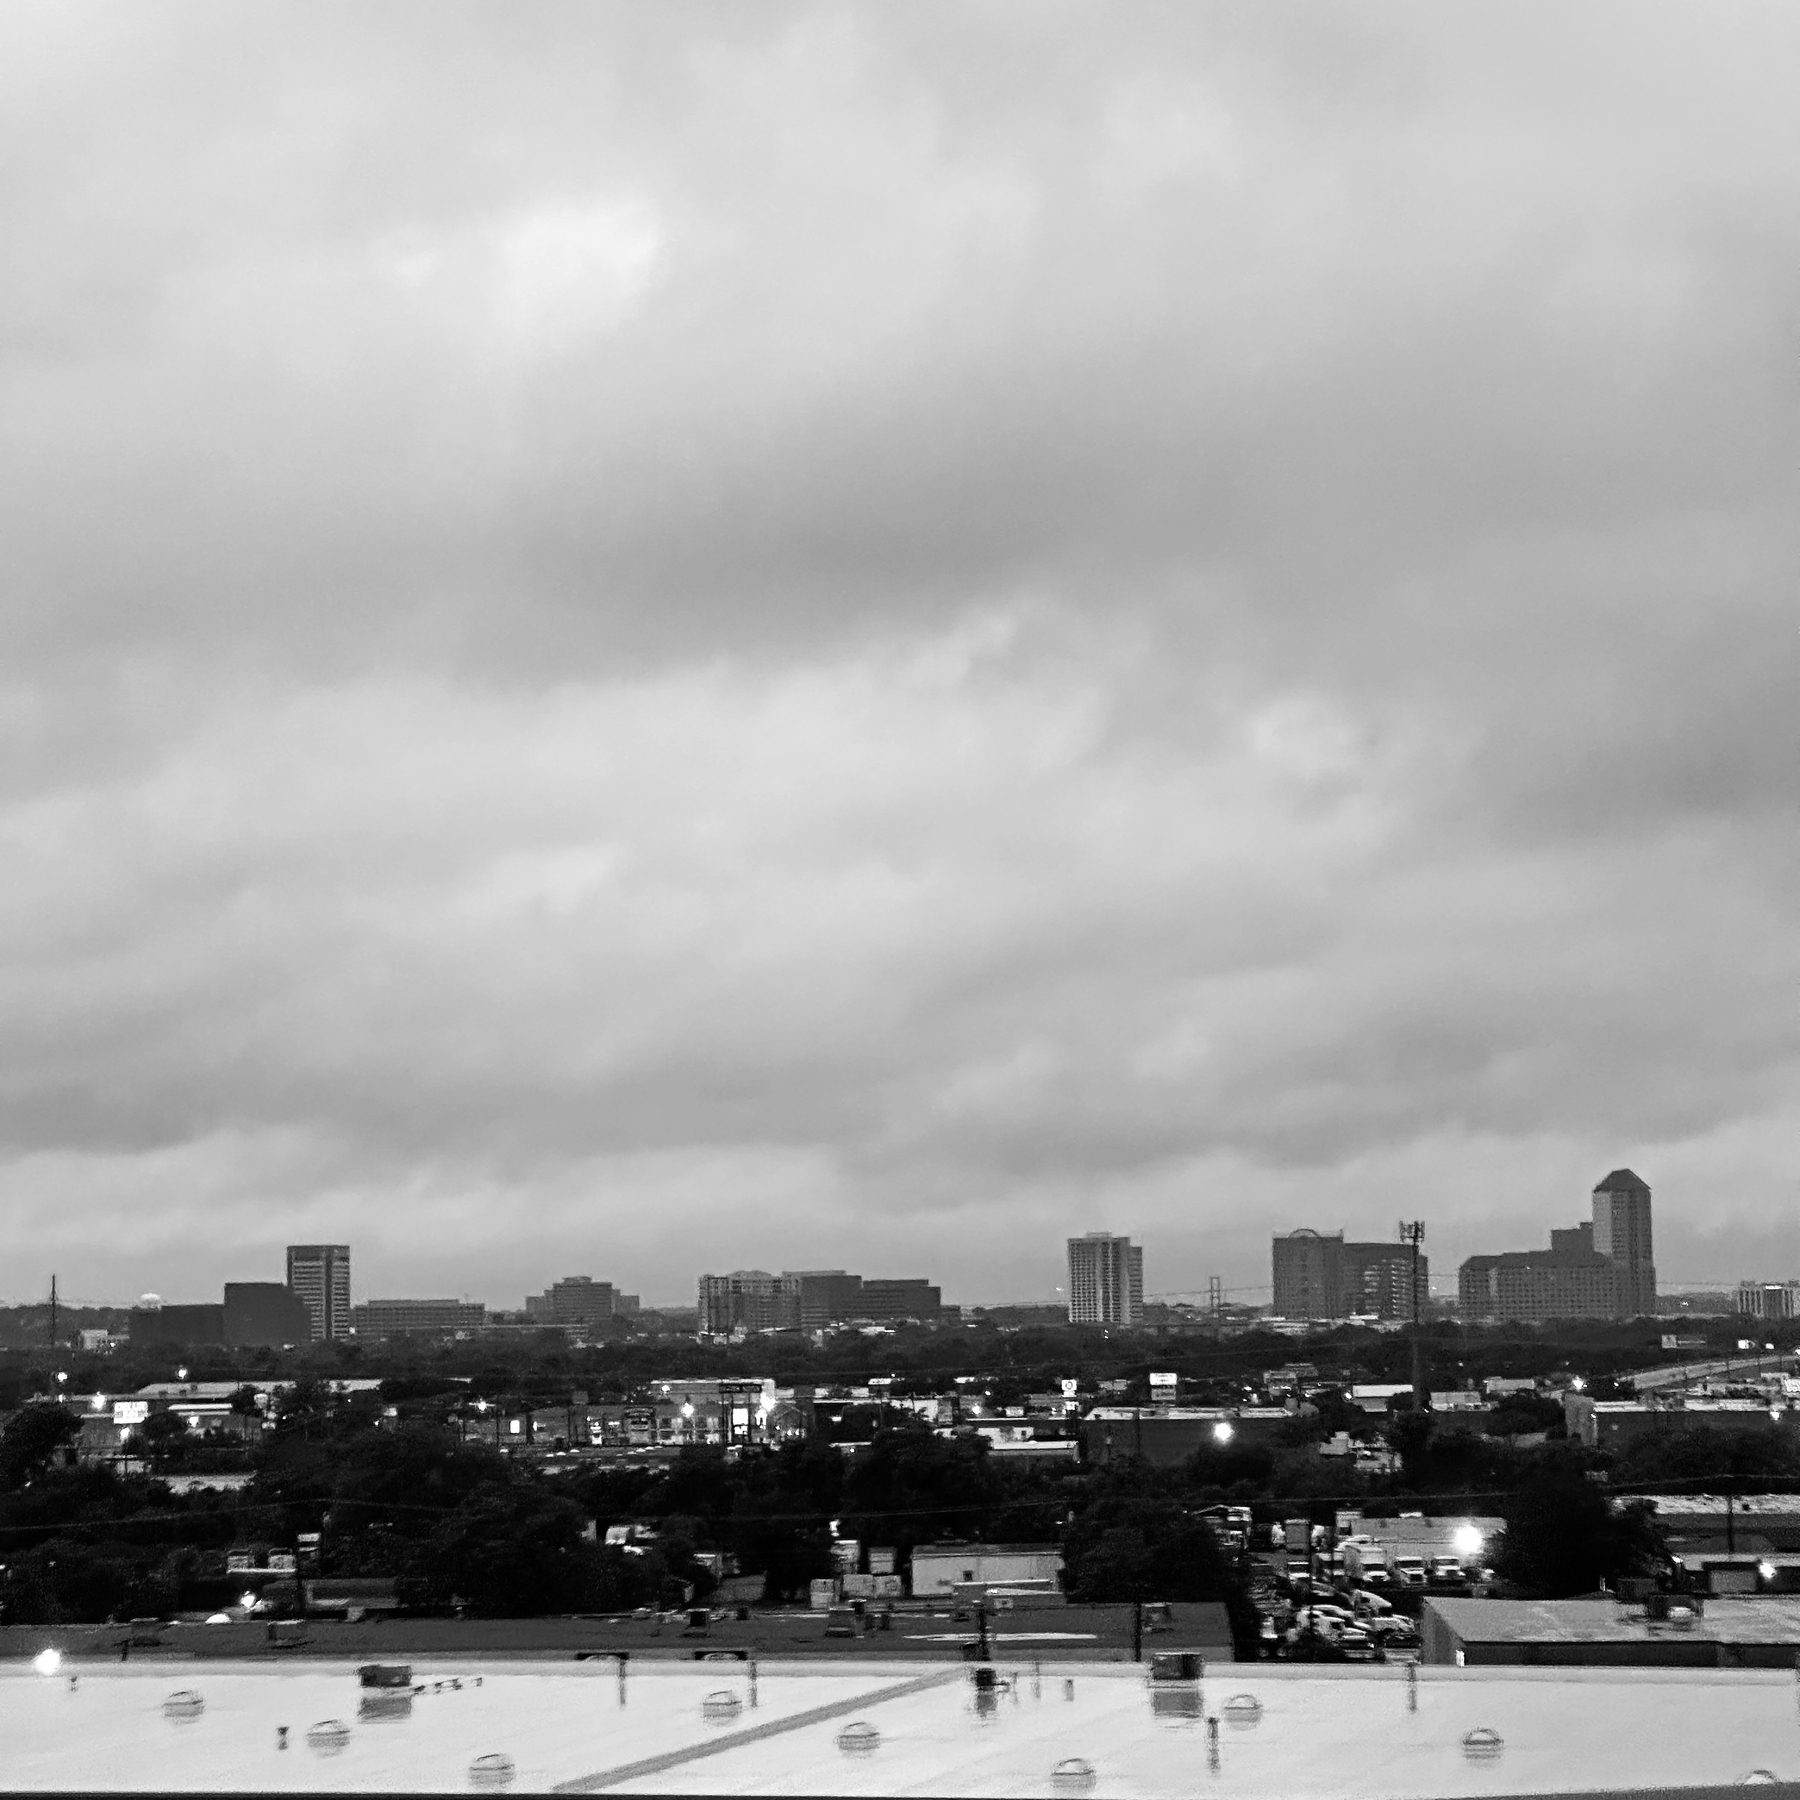 A grayscale cityscape is depicted under a cloudy sky, with buildings silhouetted on the horizon and a rooftop in the foreground.